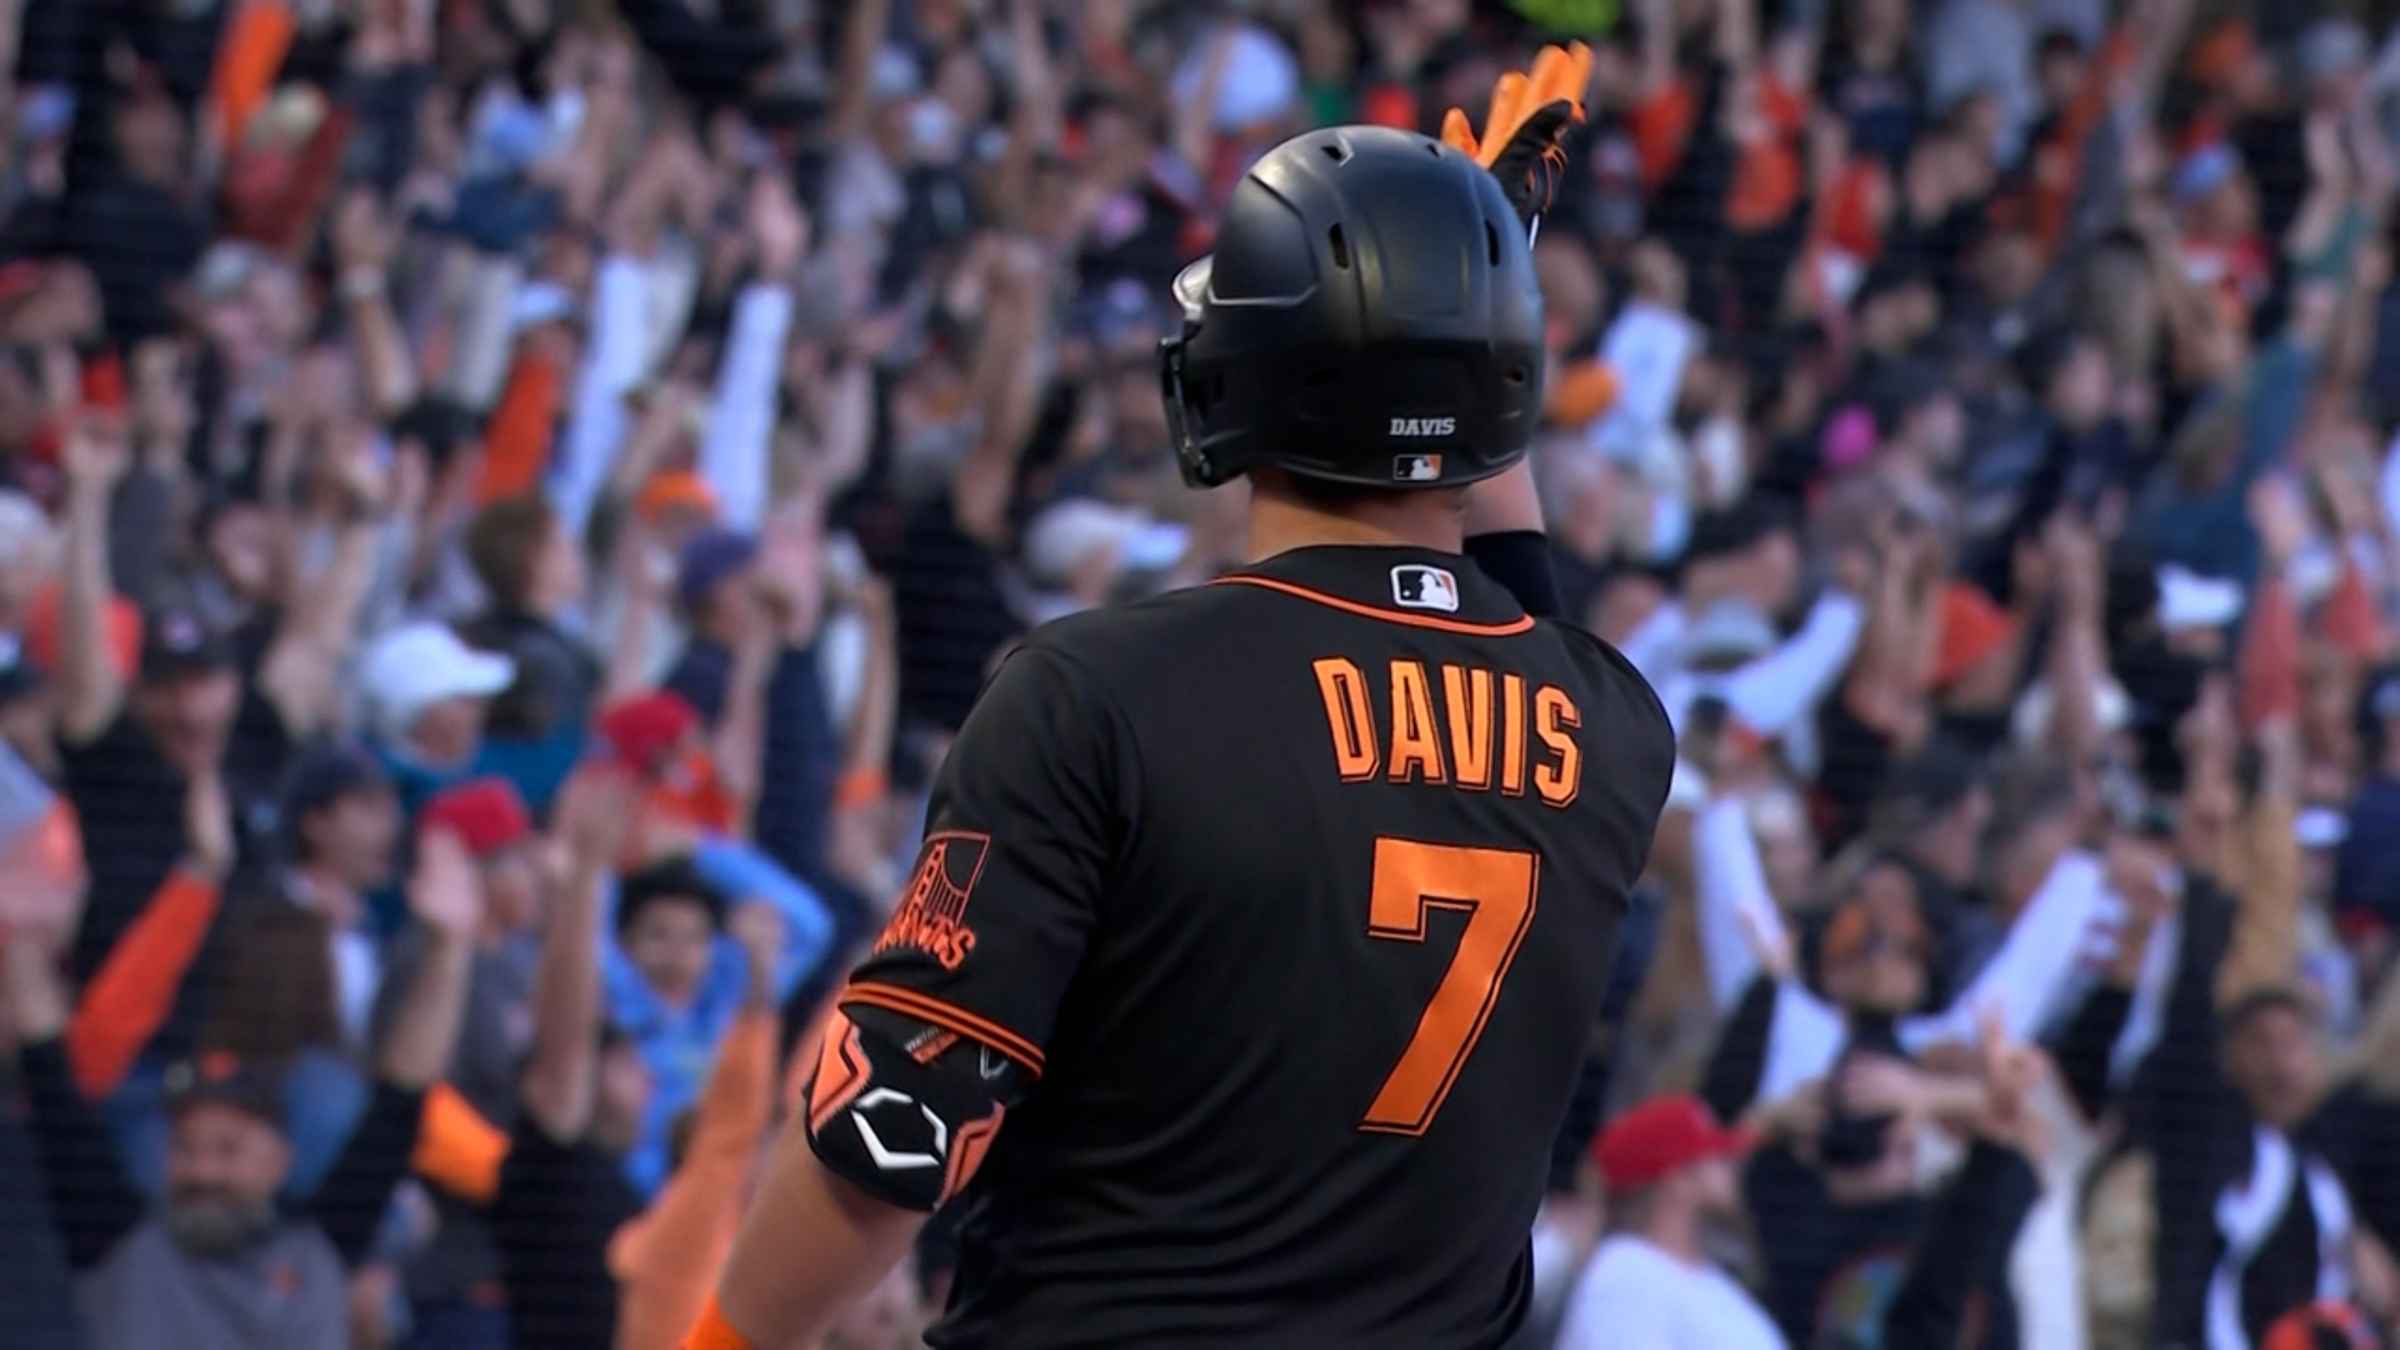 J.D. Davis homers in 9th to give Giants 3-2 win over Red Sox